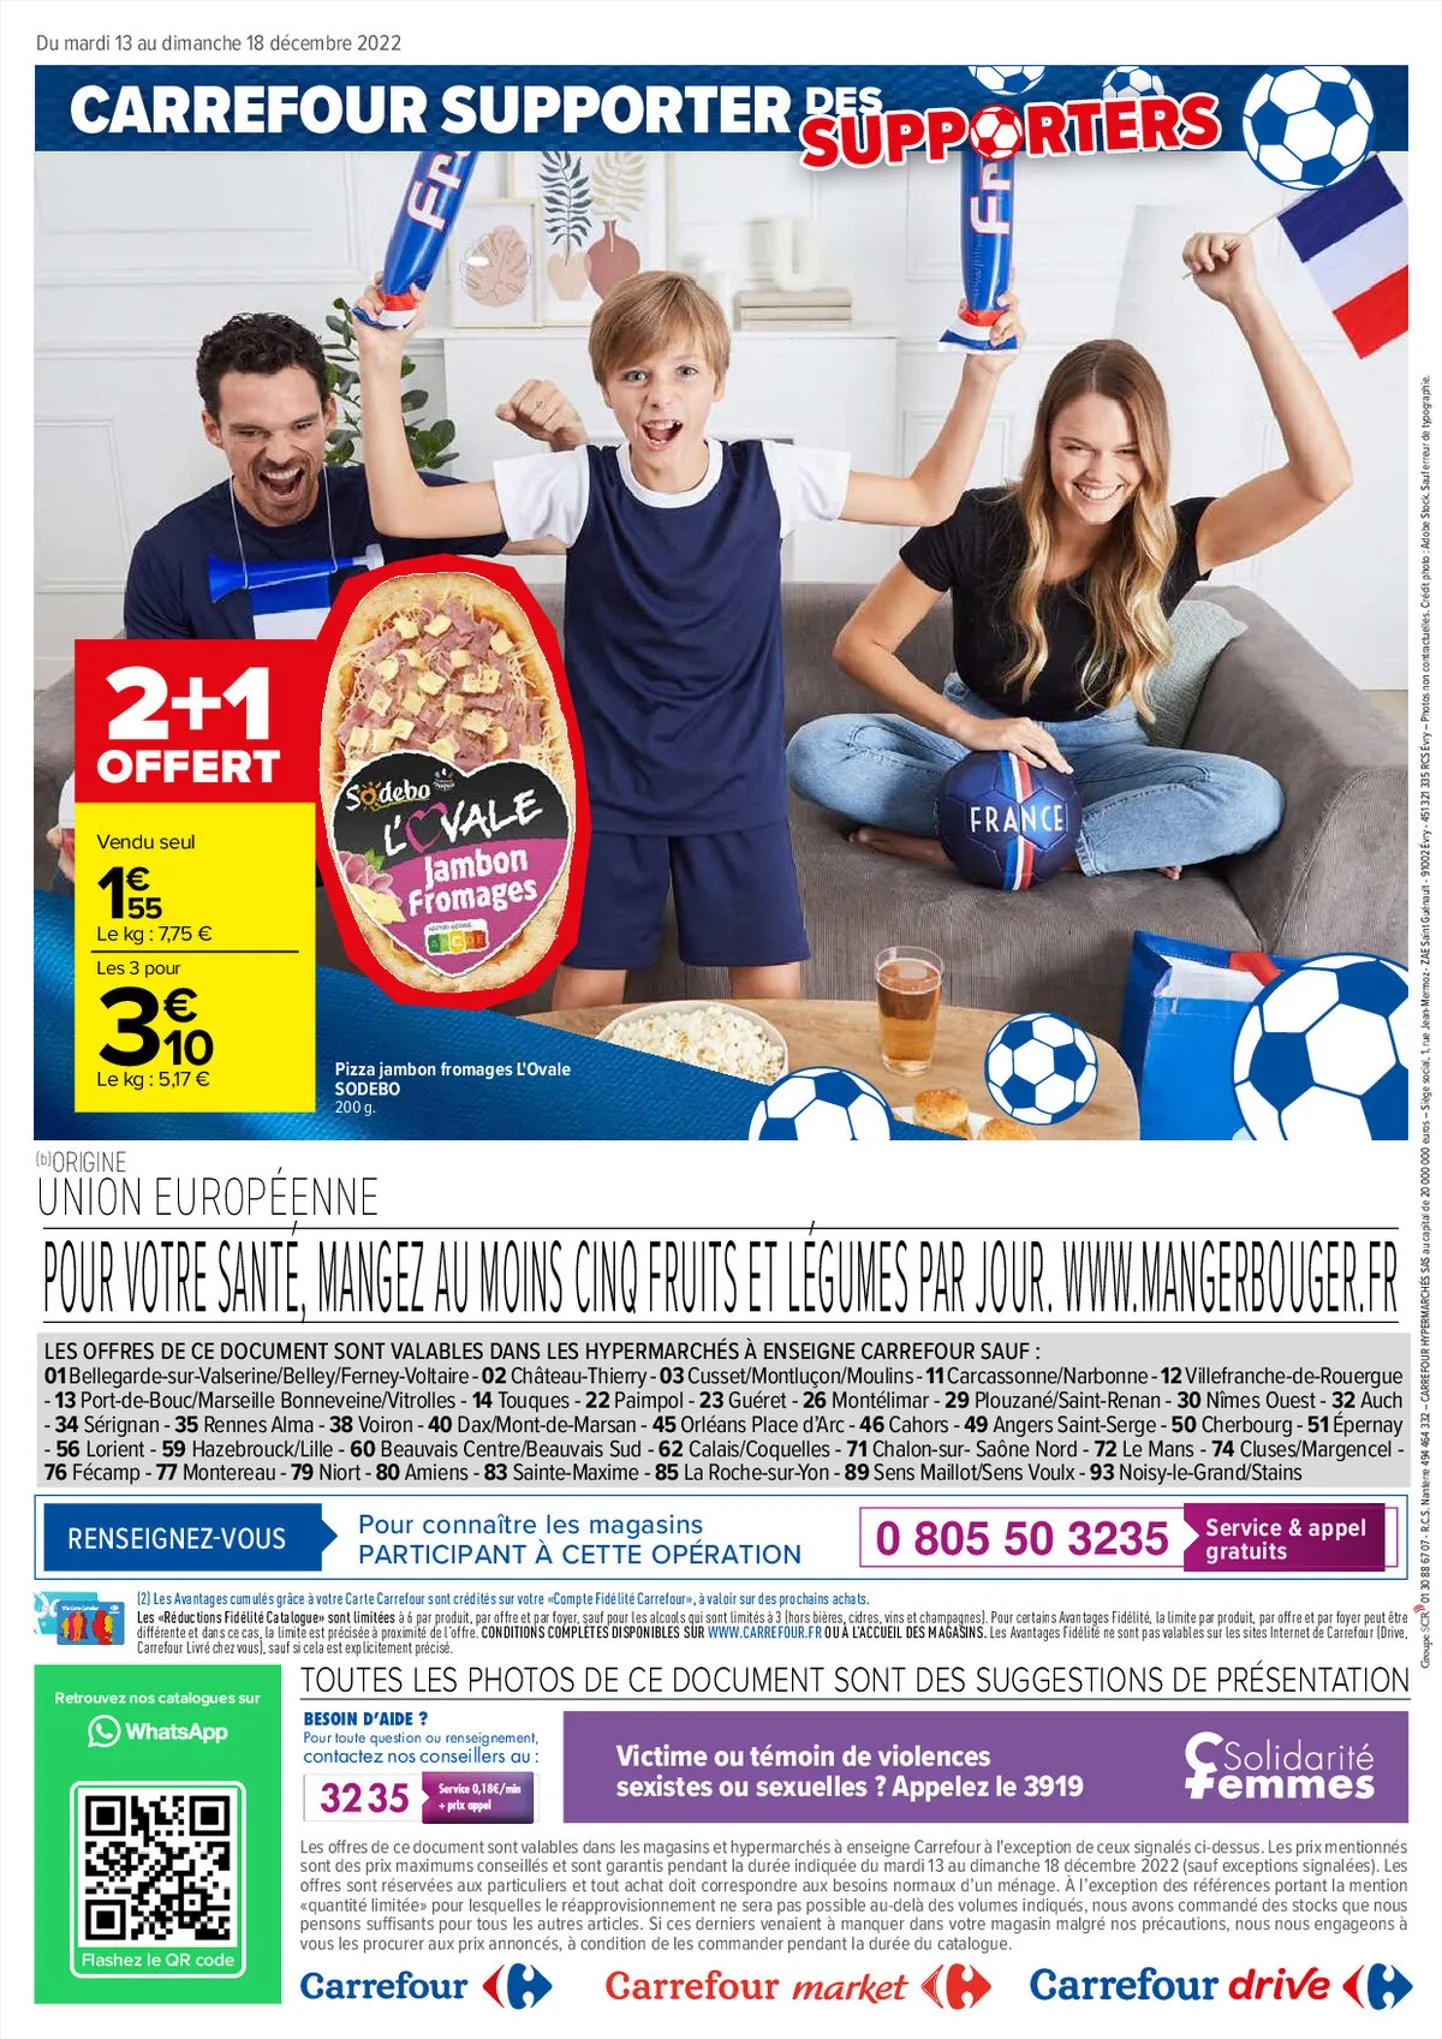 Catalogue Carrefour Supporter des Supporters, page 00012